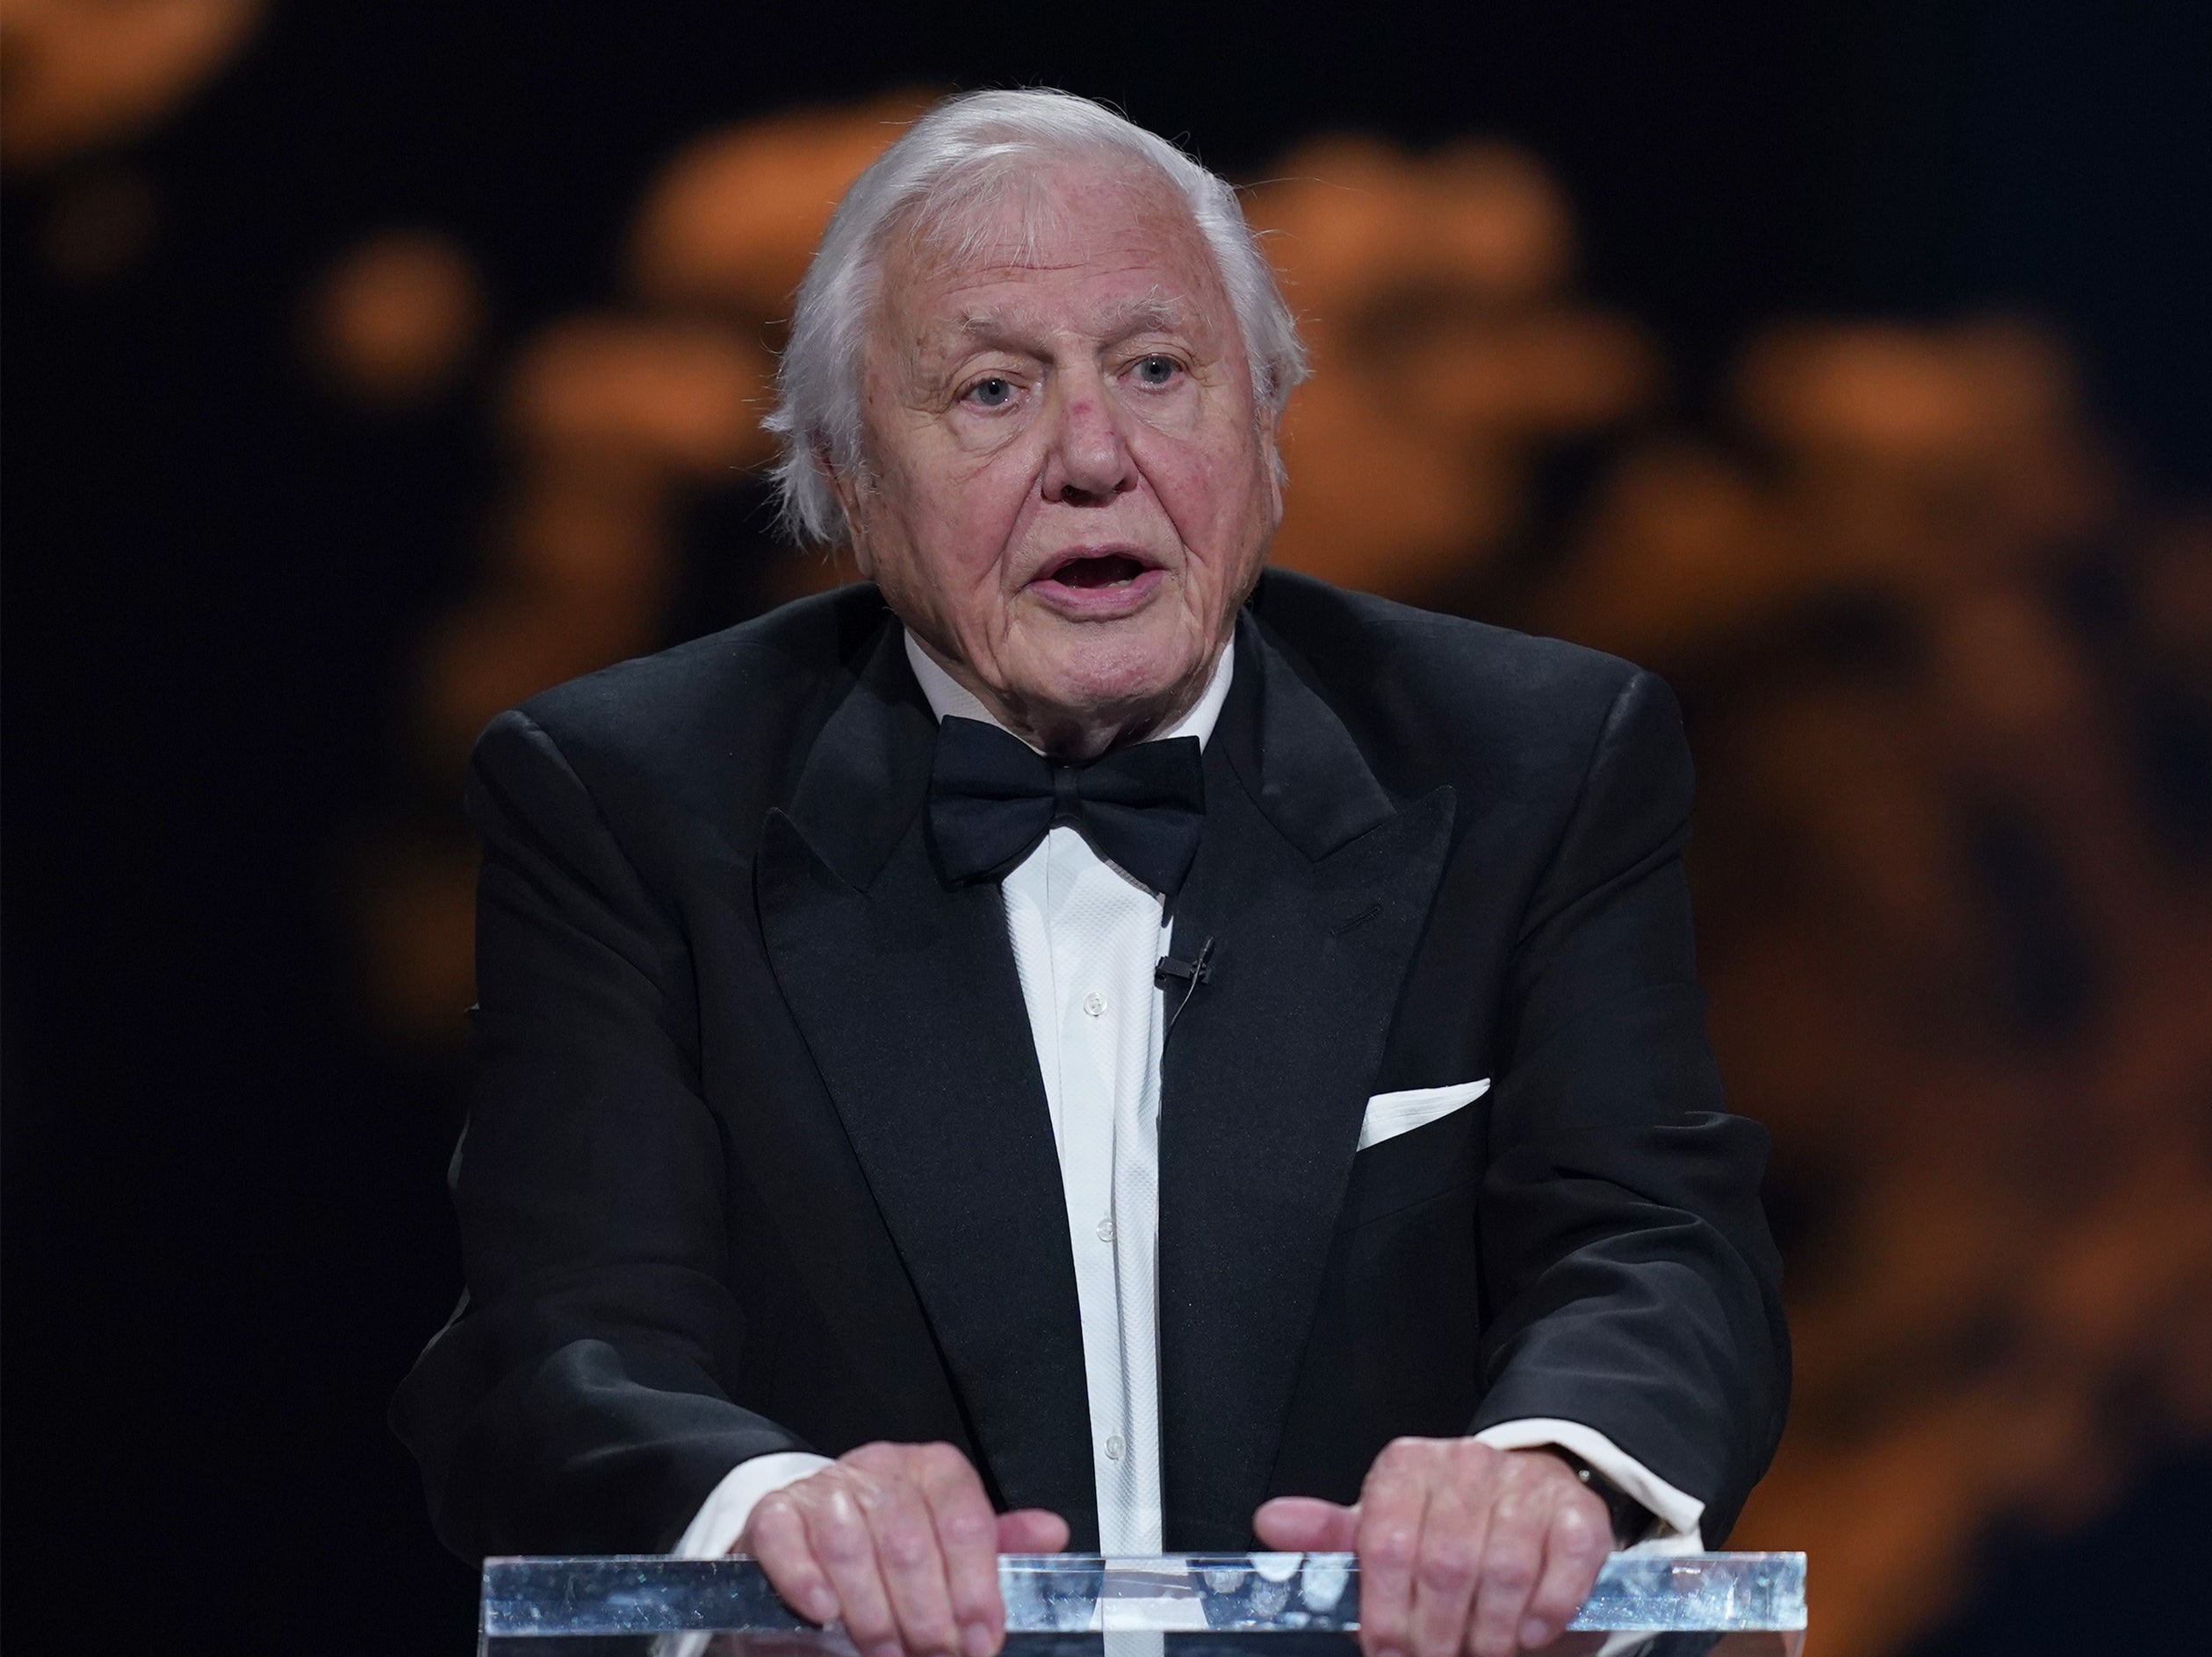 David Attenborough on stage at the awards ceremony